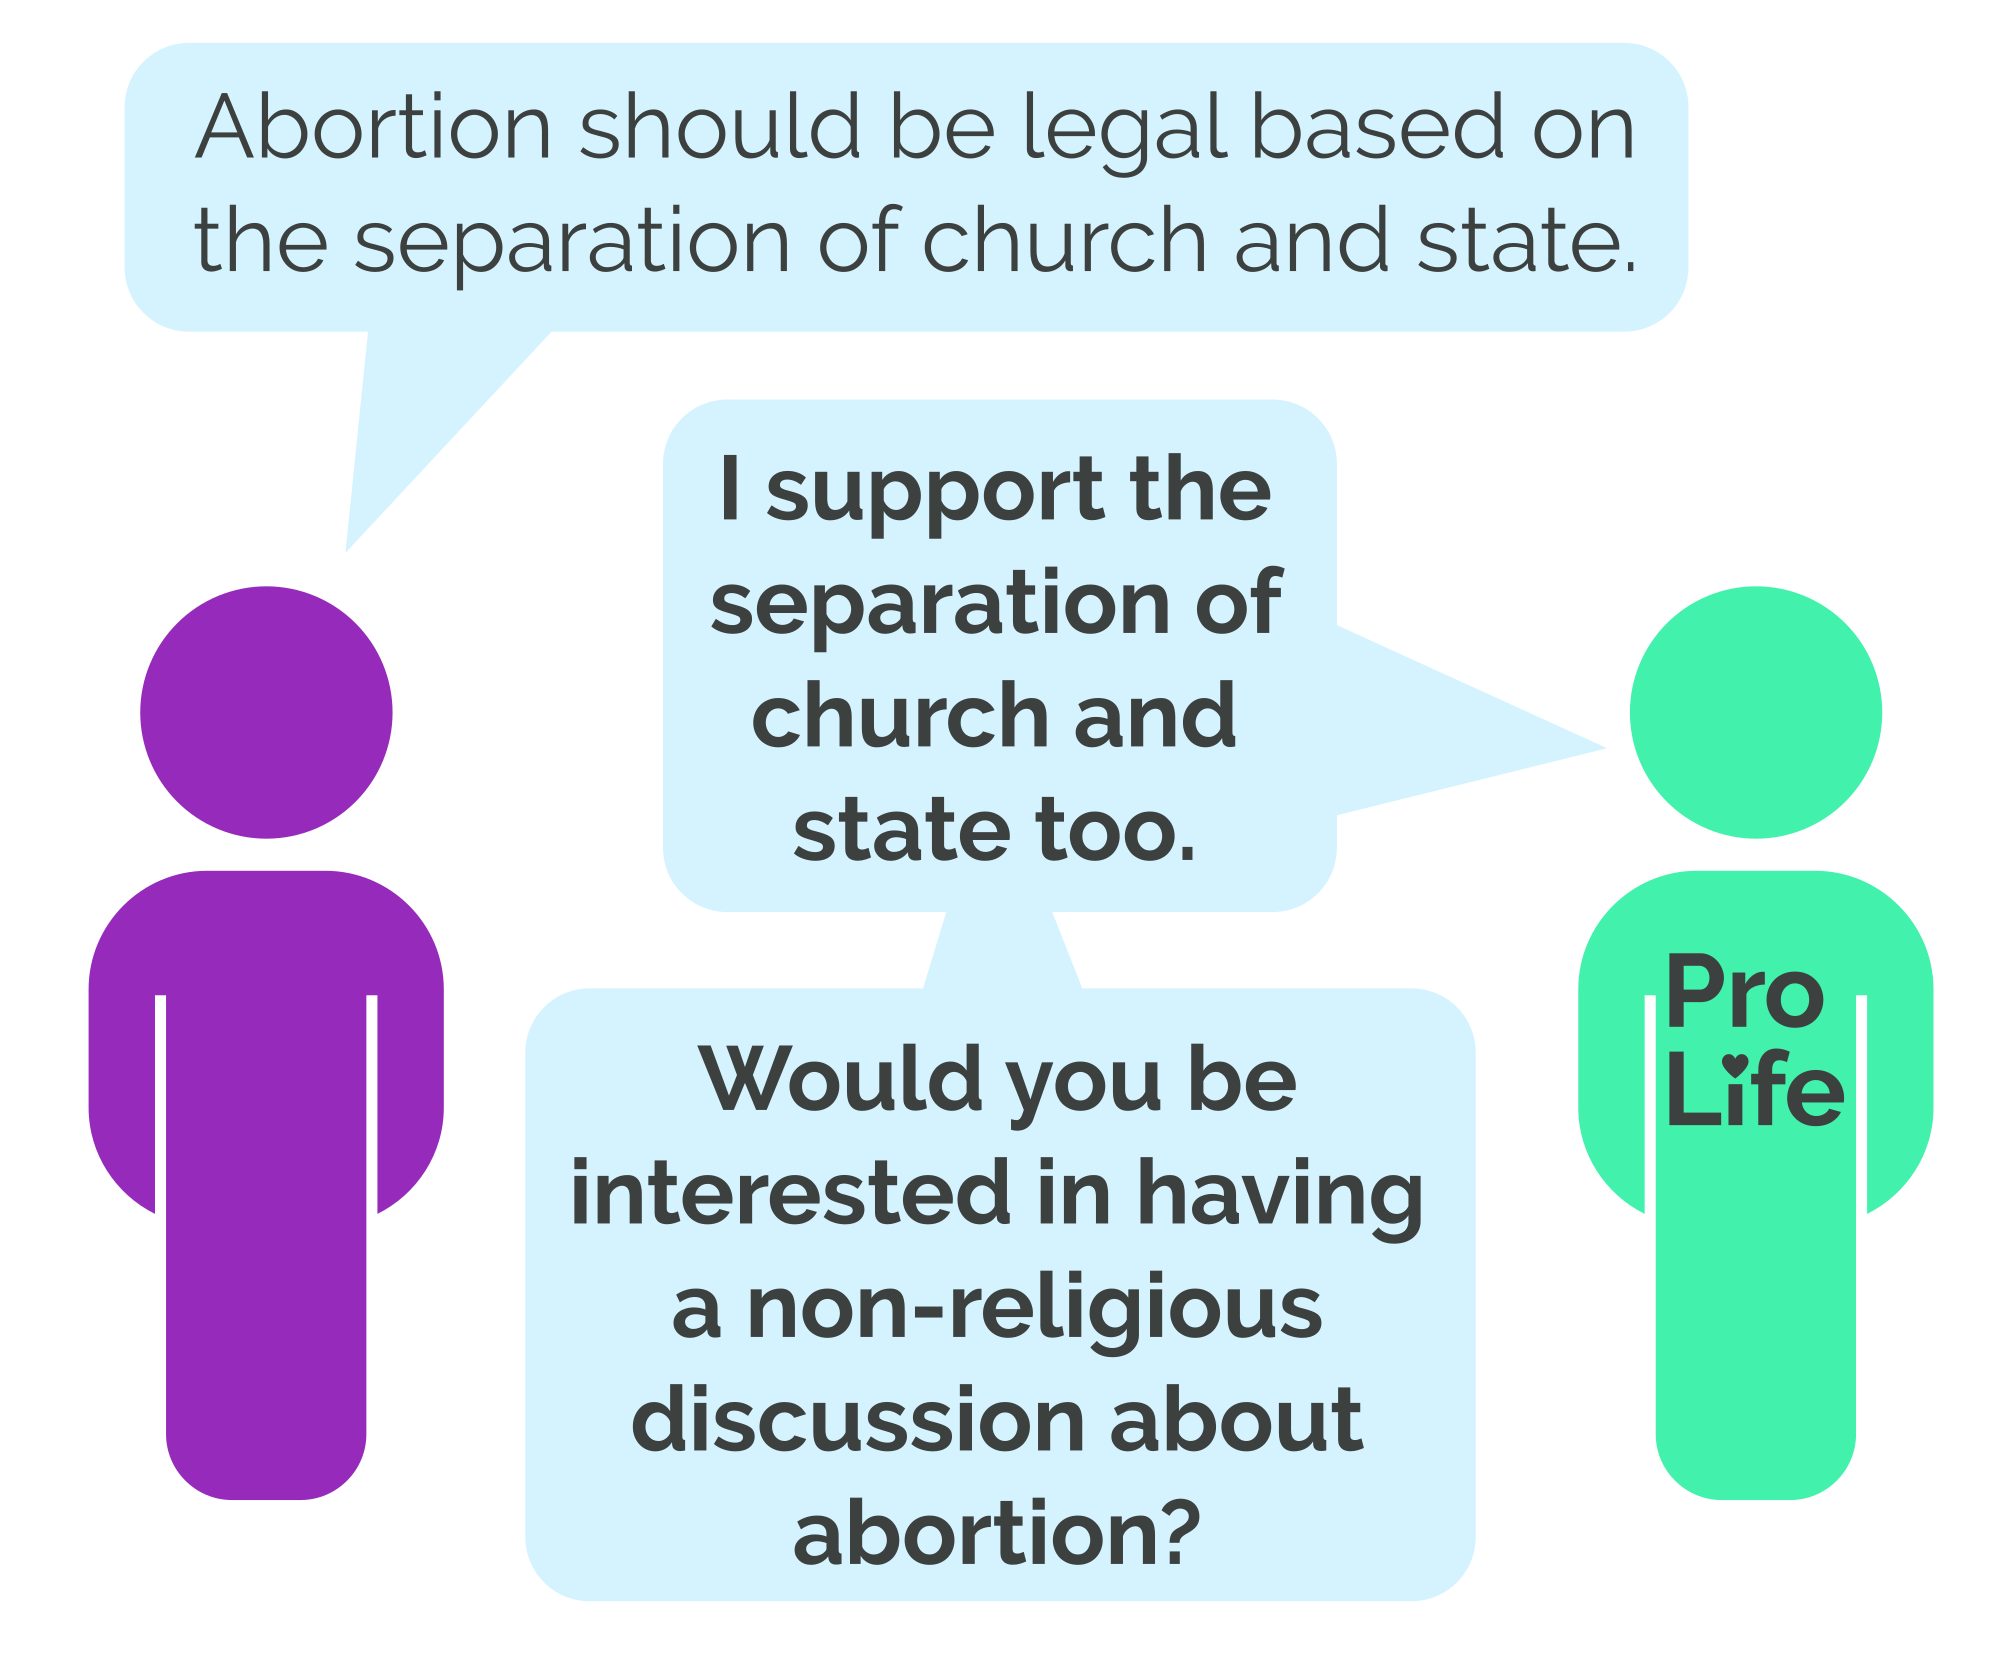 Person 1: Abortion should be legal based on the separation of church and state. Person 2 (our hero): I support the separation of church and state too. Would you be interested in having a non-religious discussion about abortion?